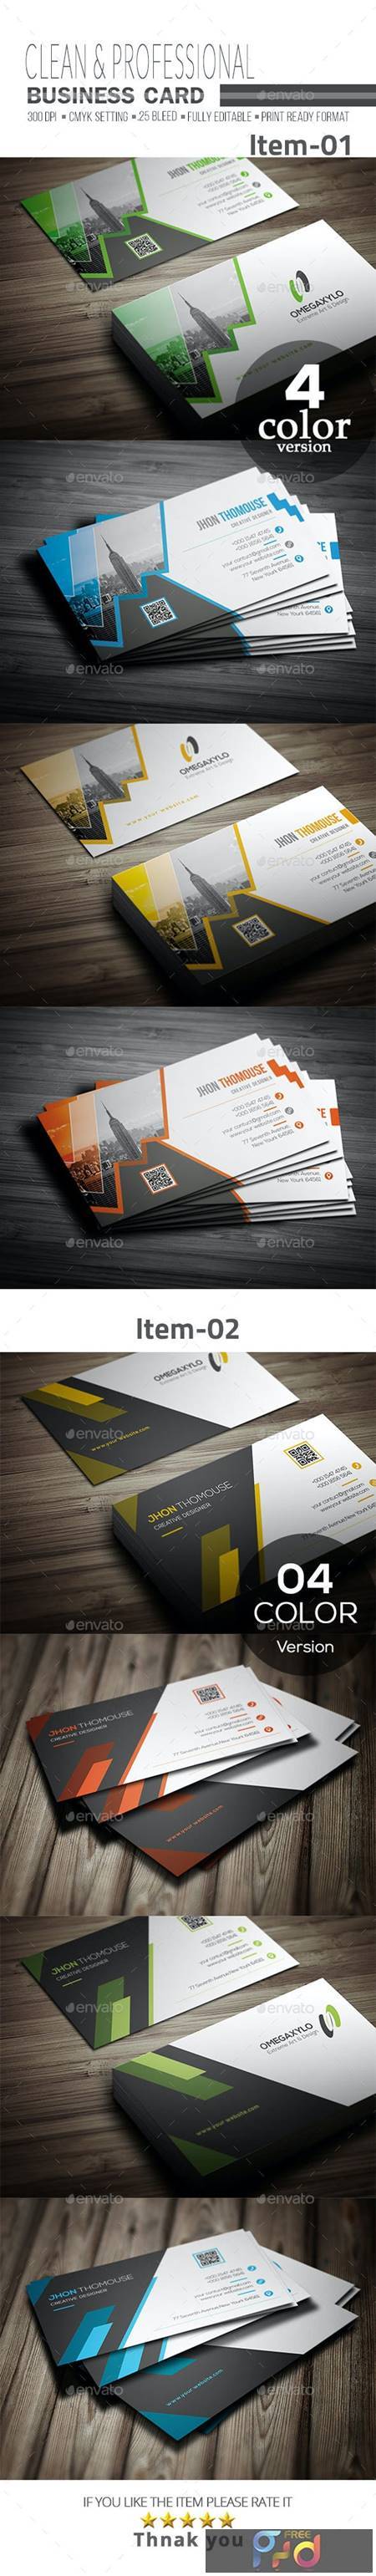 Business Card Bundle 2 In 1